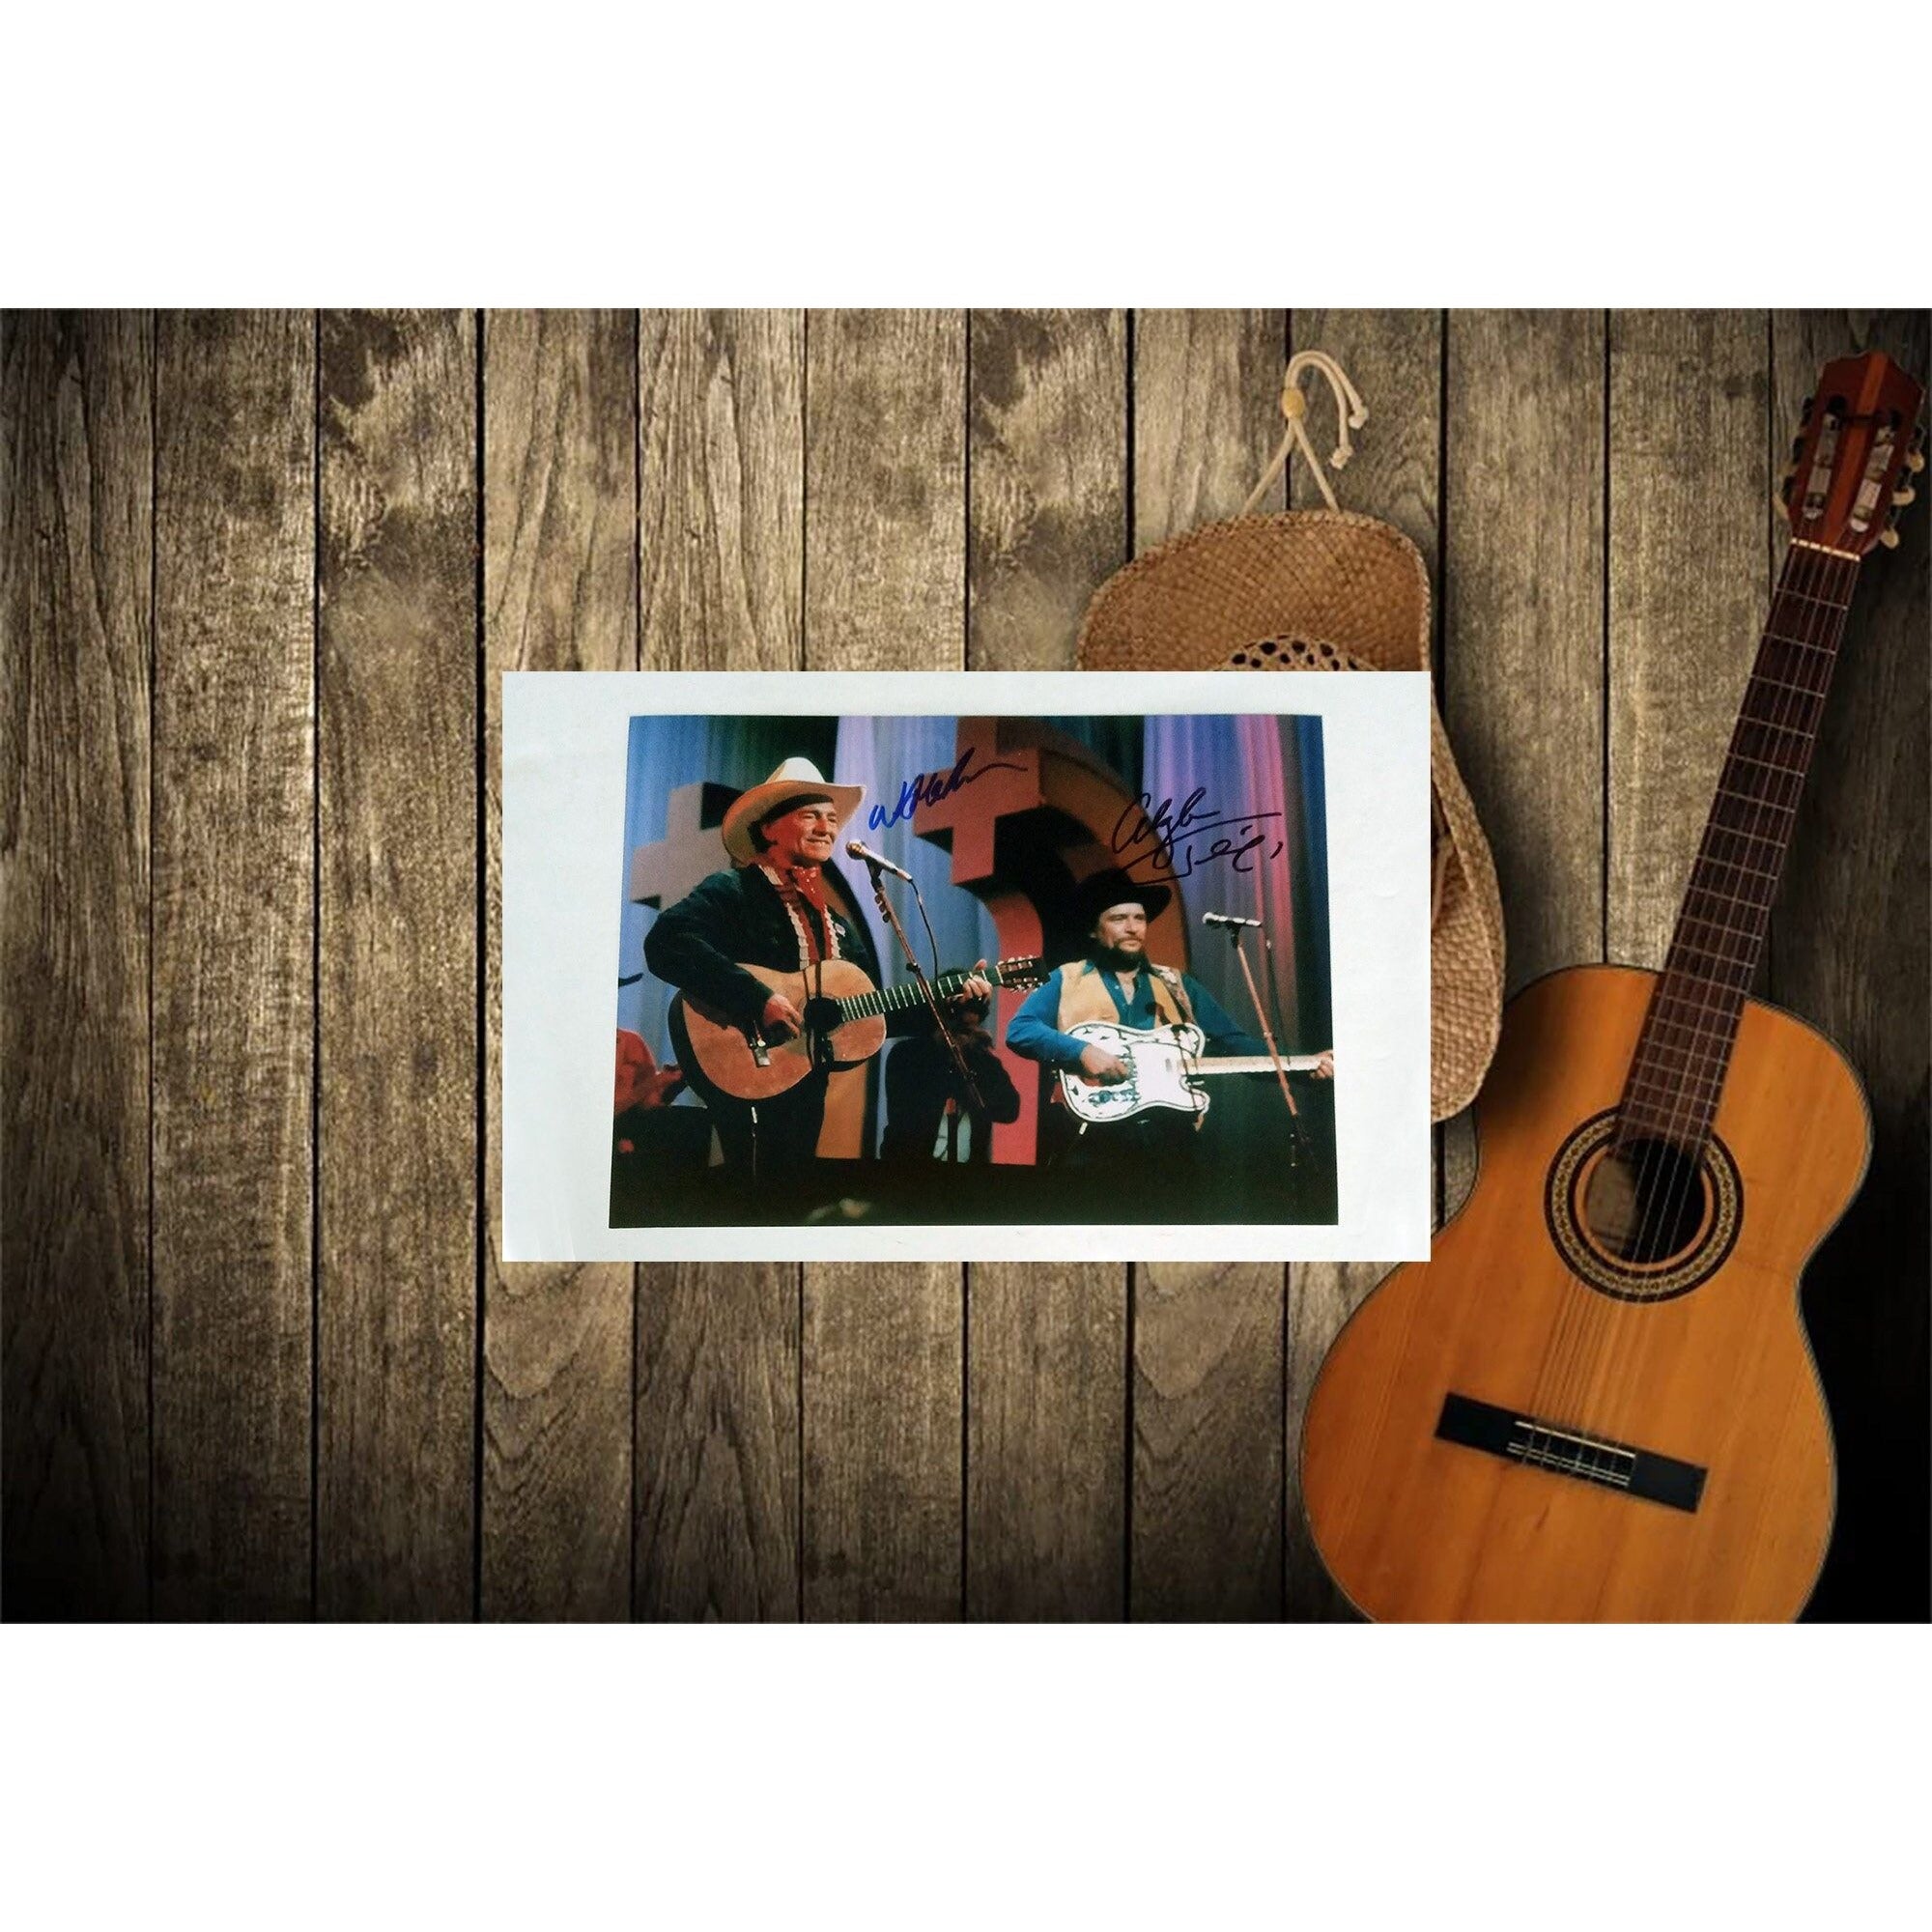 Waylon Jennings and Willie Nelson 8 by 10 signed photo with proof